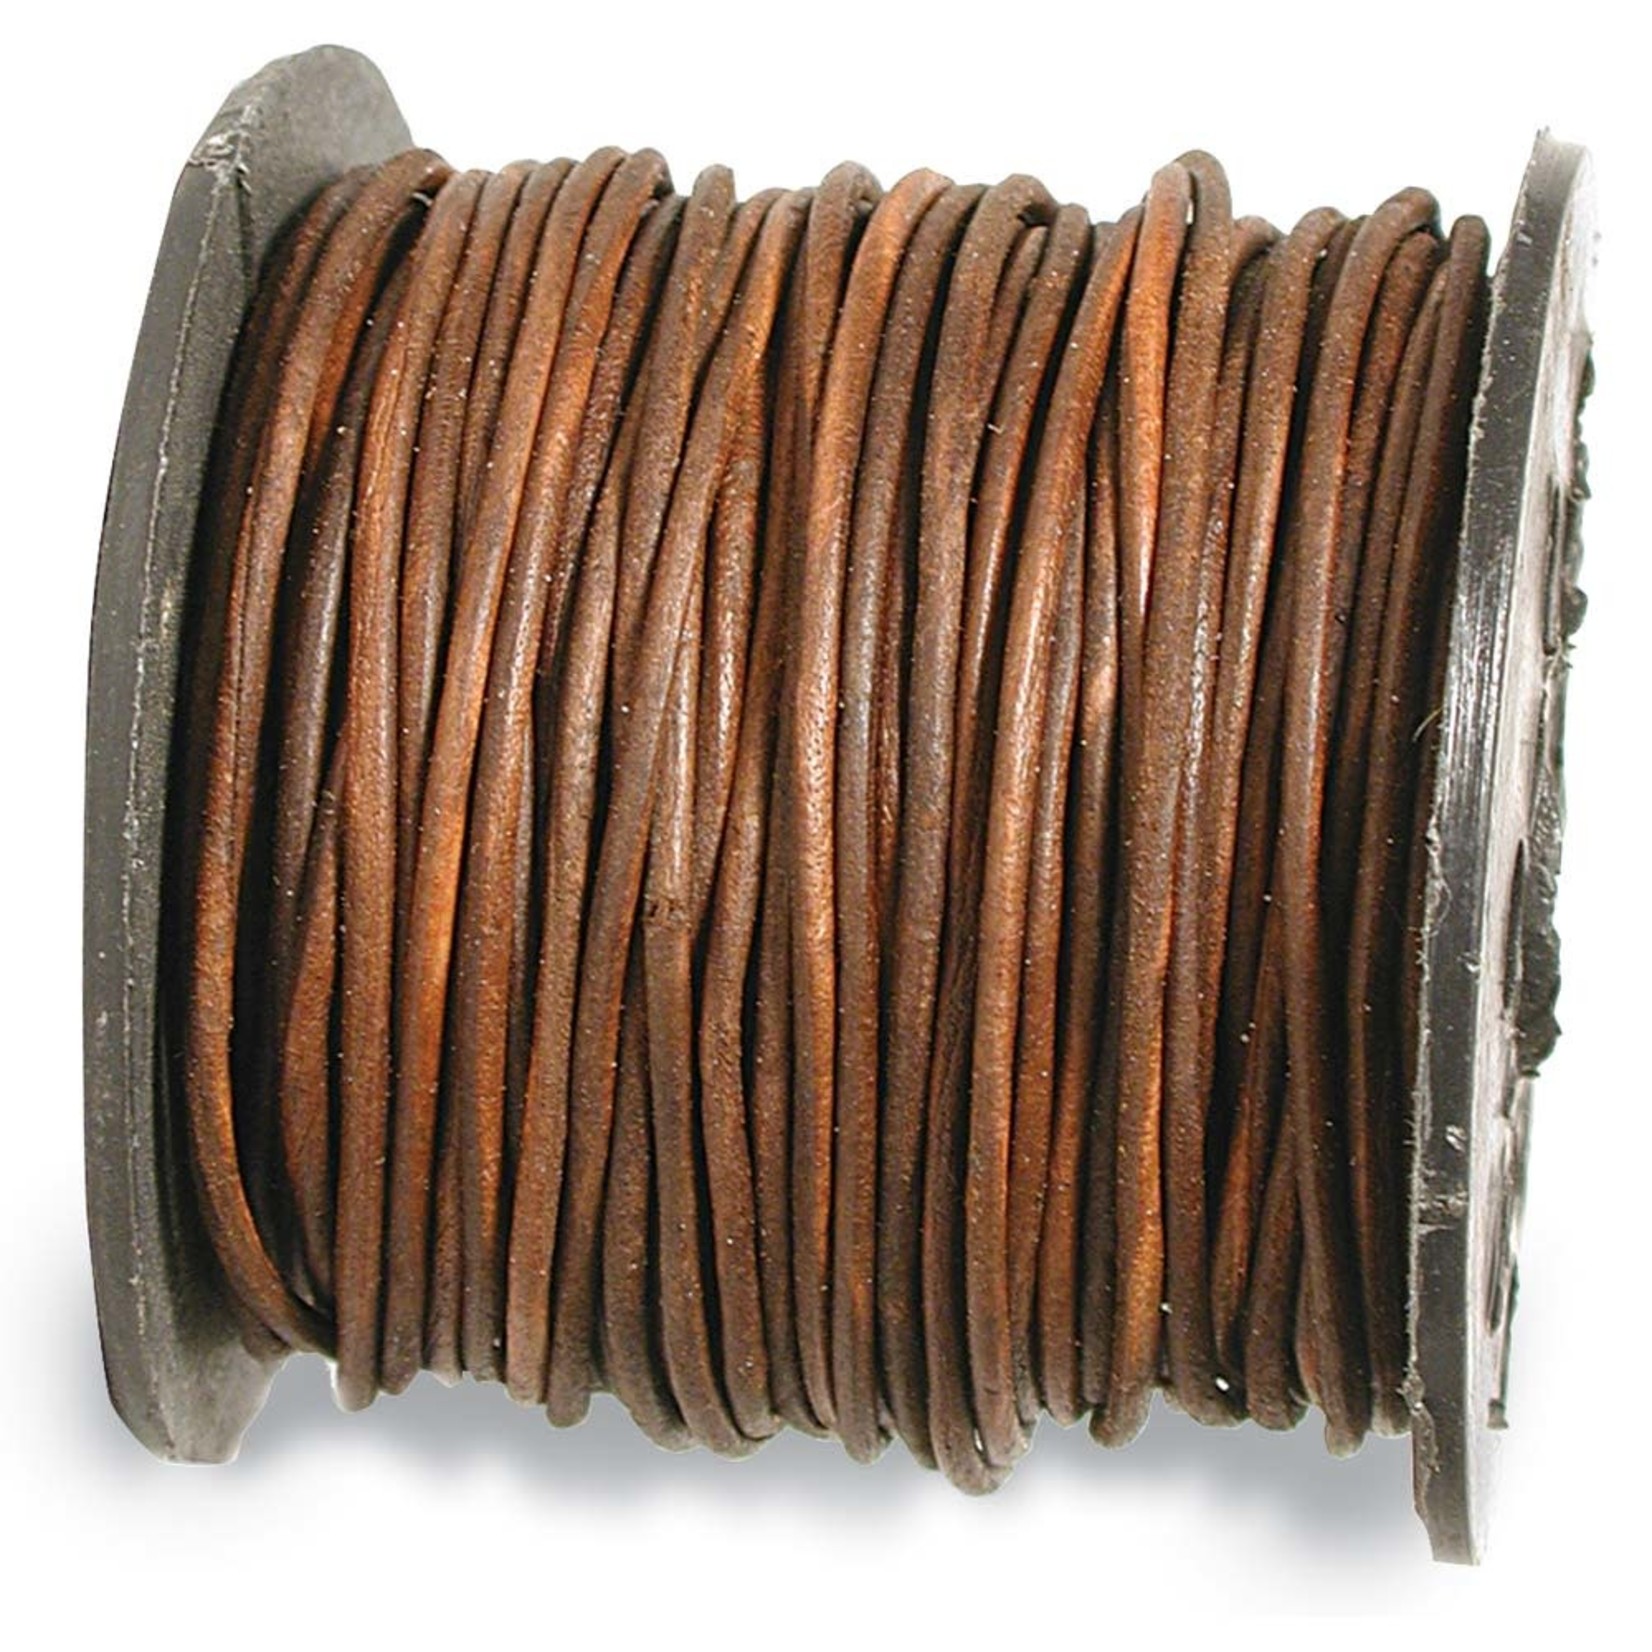 Leather 1mm Round Cord Distressed Brown - 1 foot